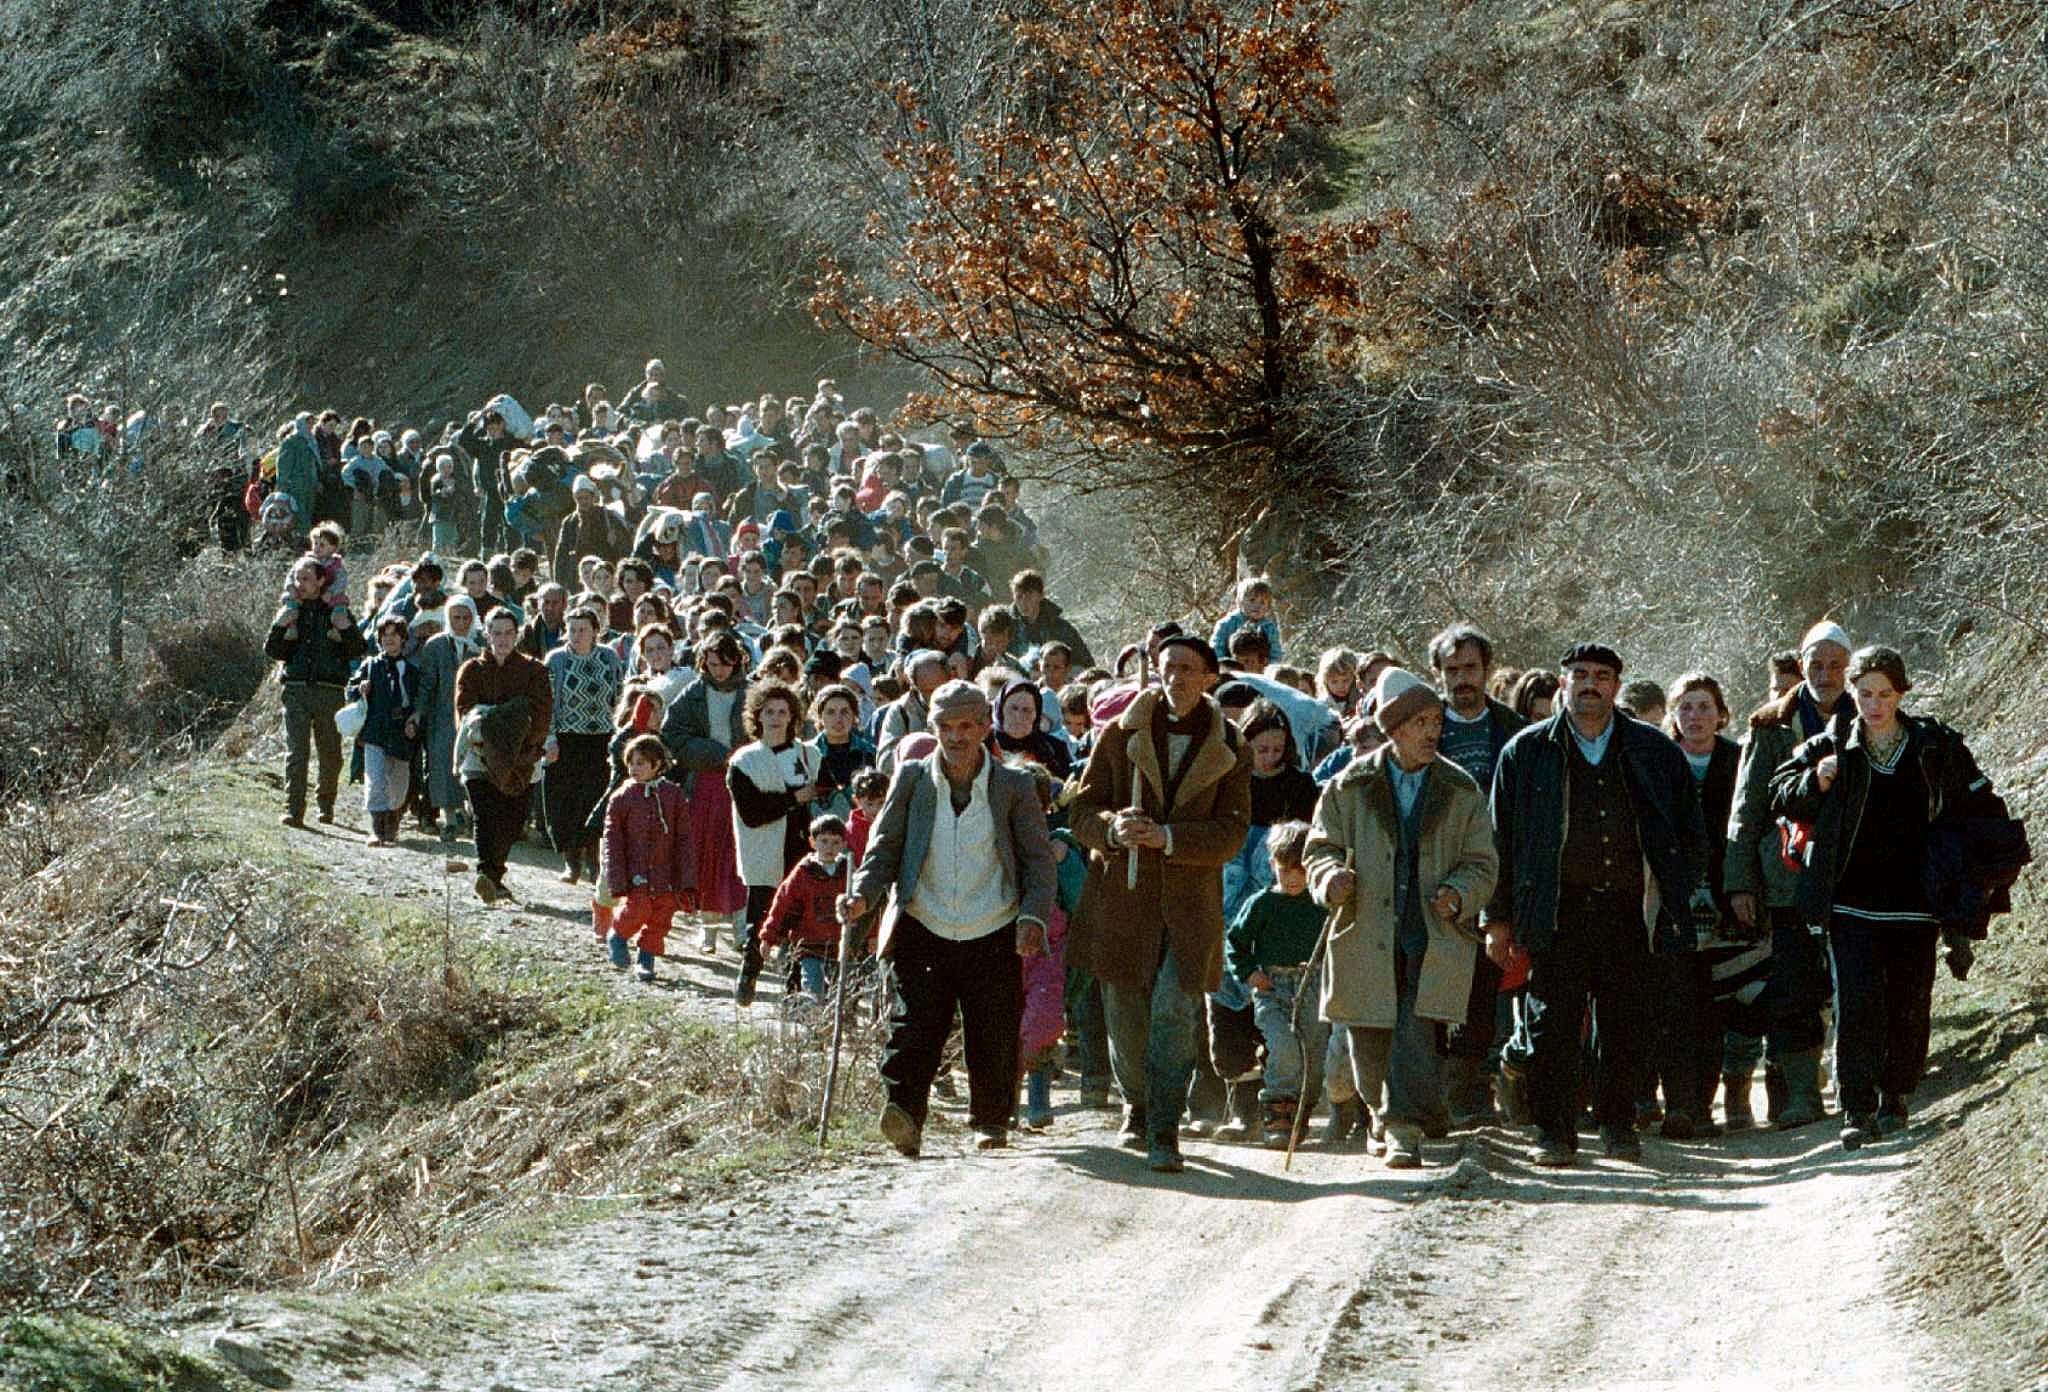 A line of ethnic Albanian refugees flee on a small road in the mountains near Kacanik, about 60km south of Kosovo's capital, Pristina, March 1999